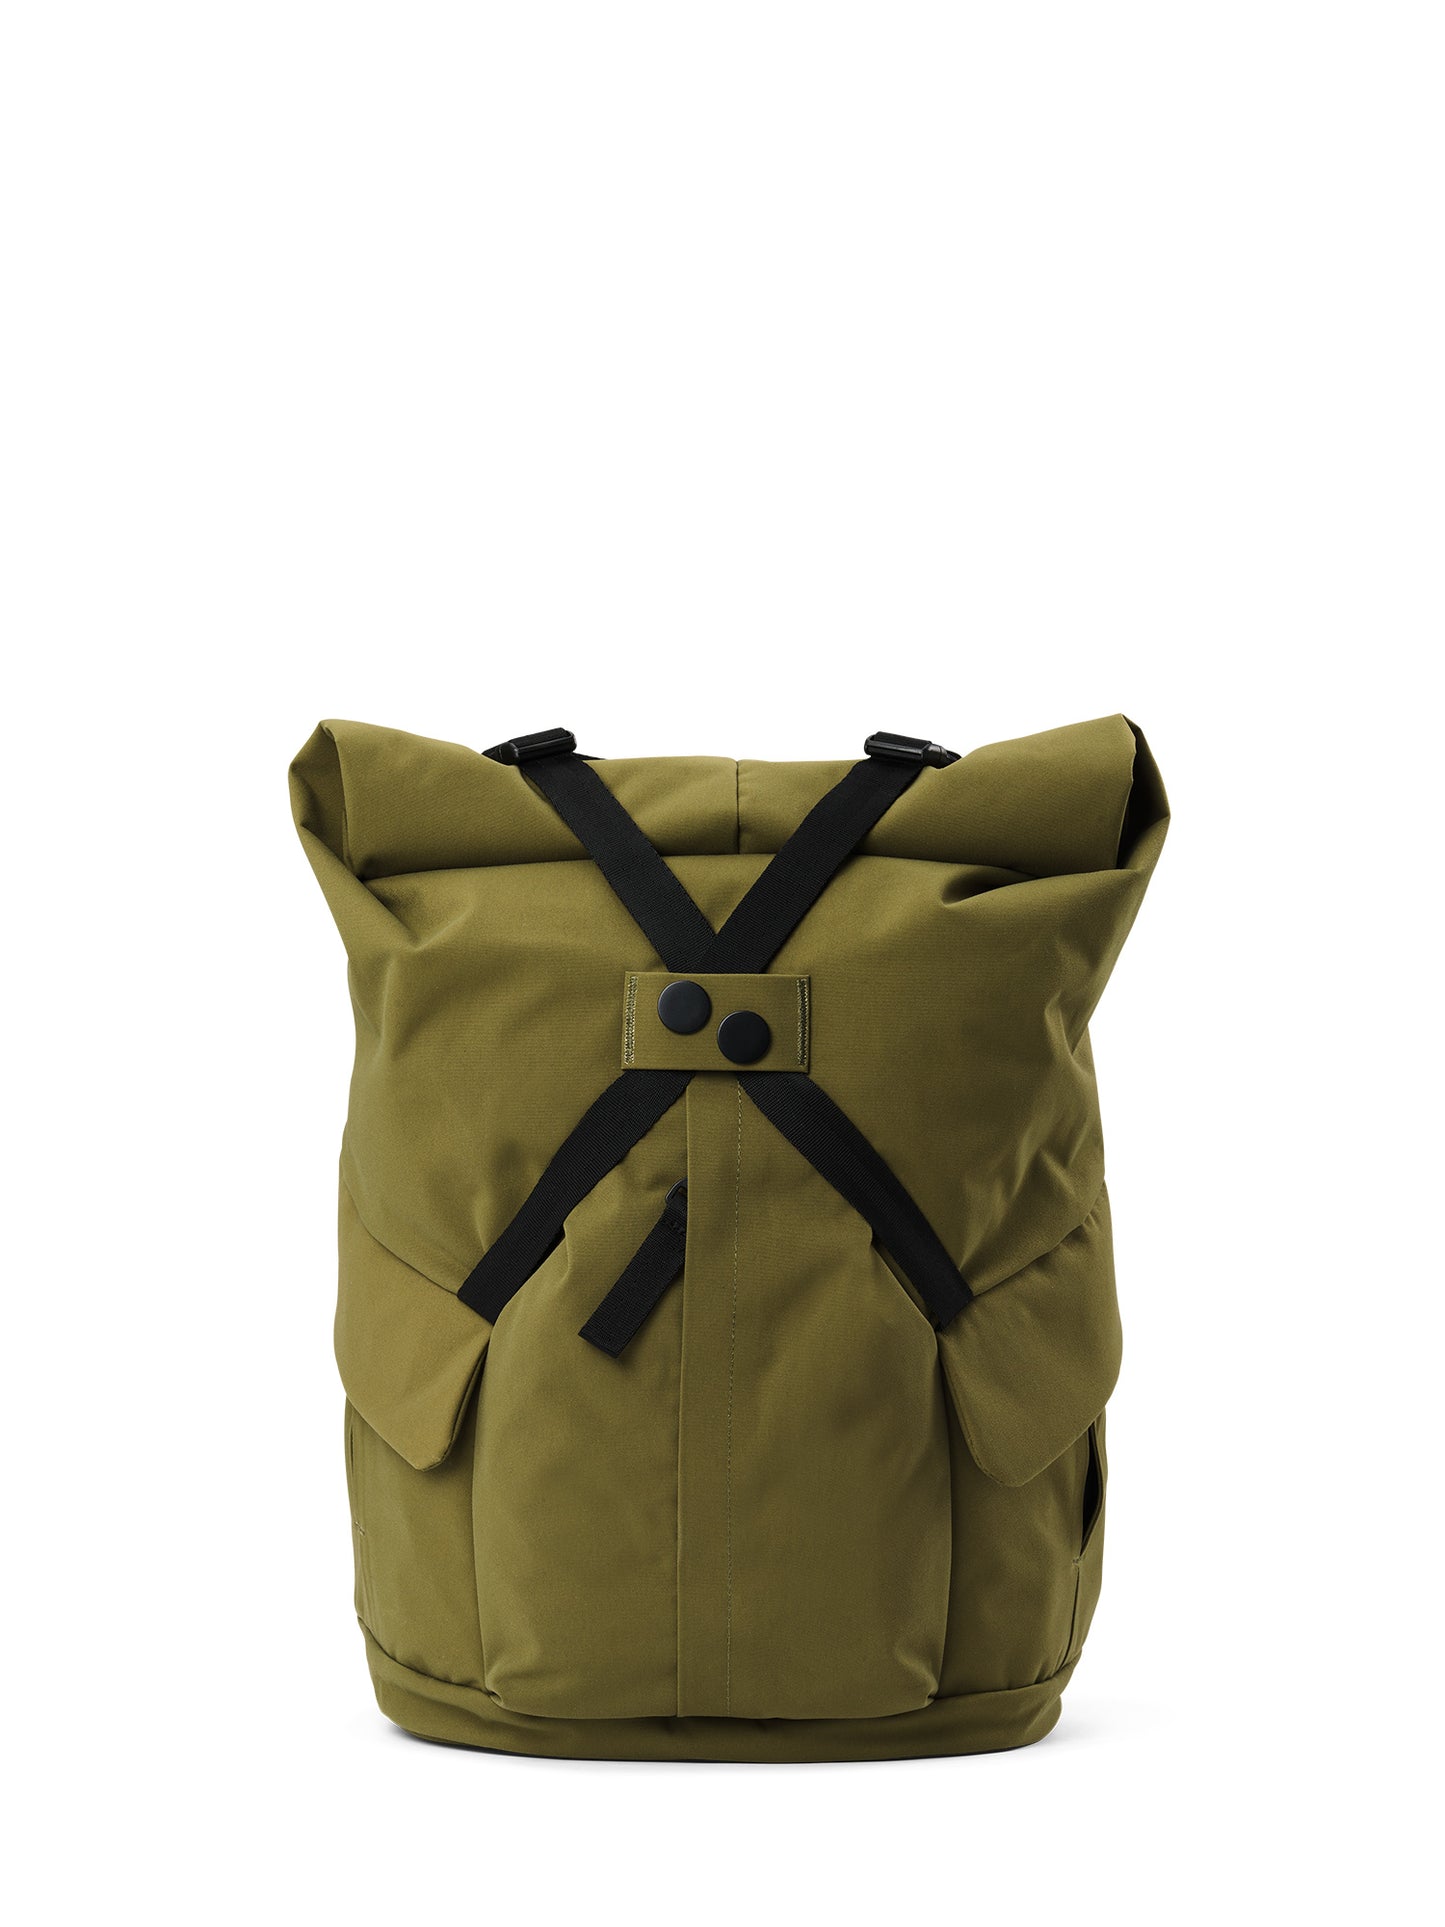 pinqponq-Kross-Solid-Olive-front